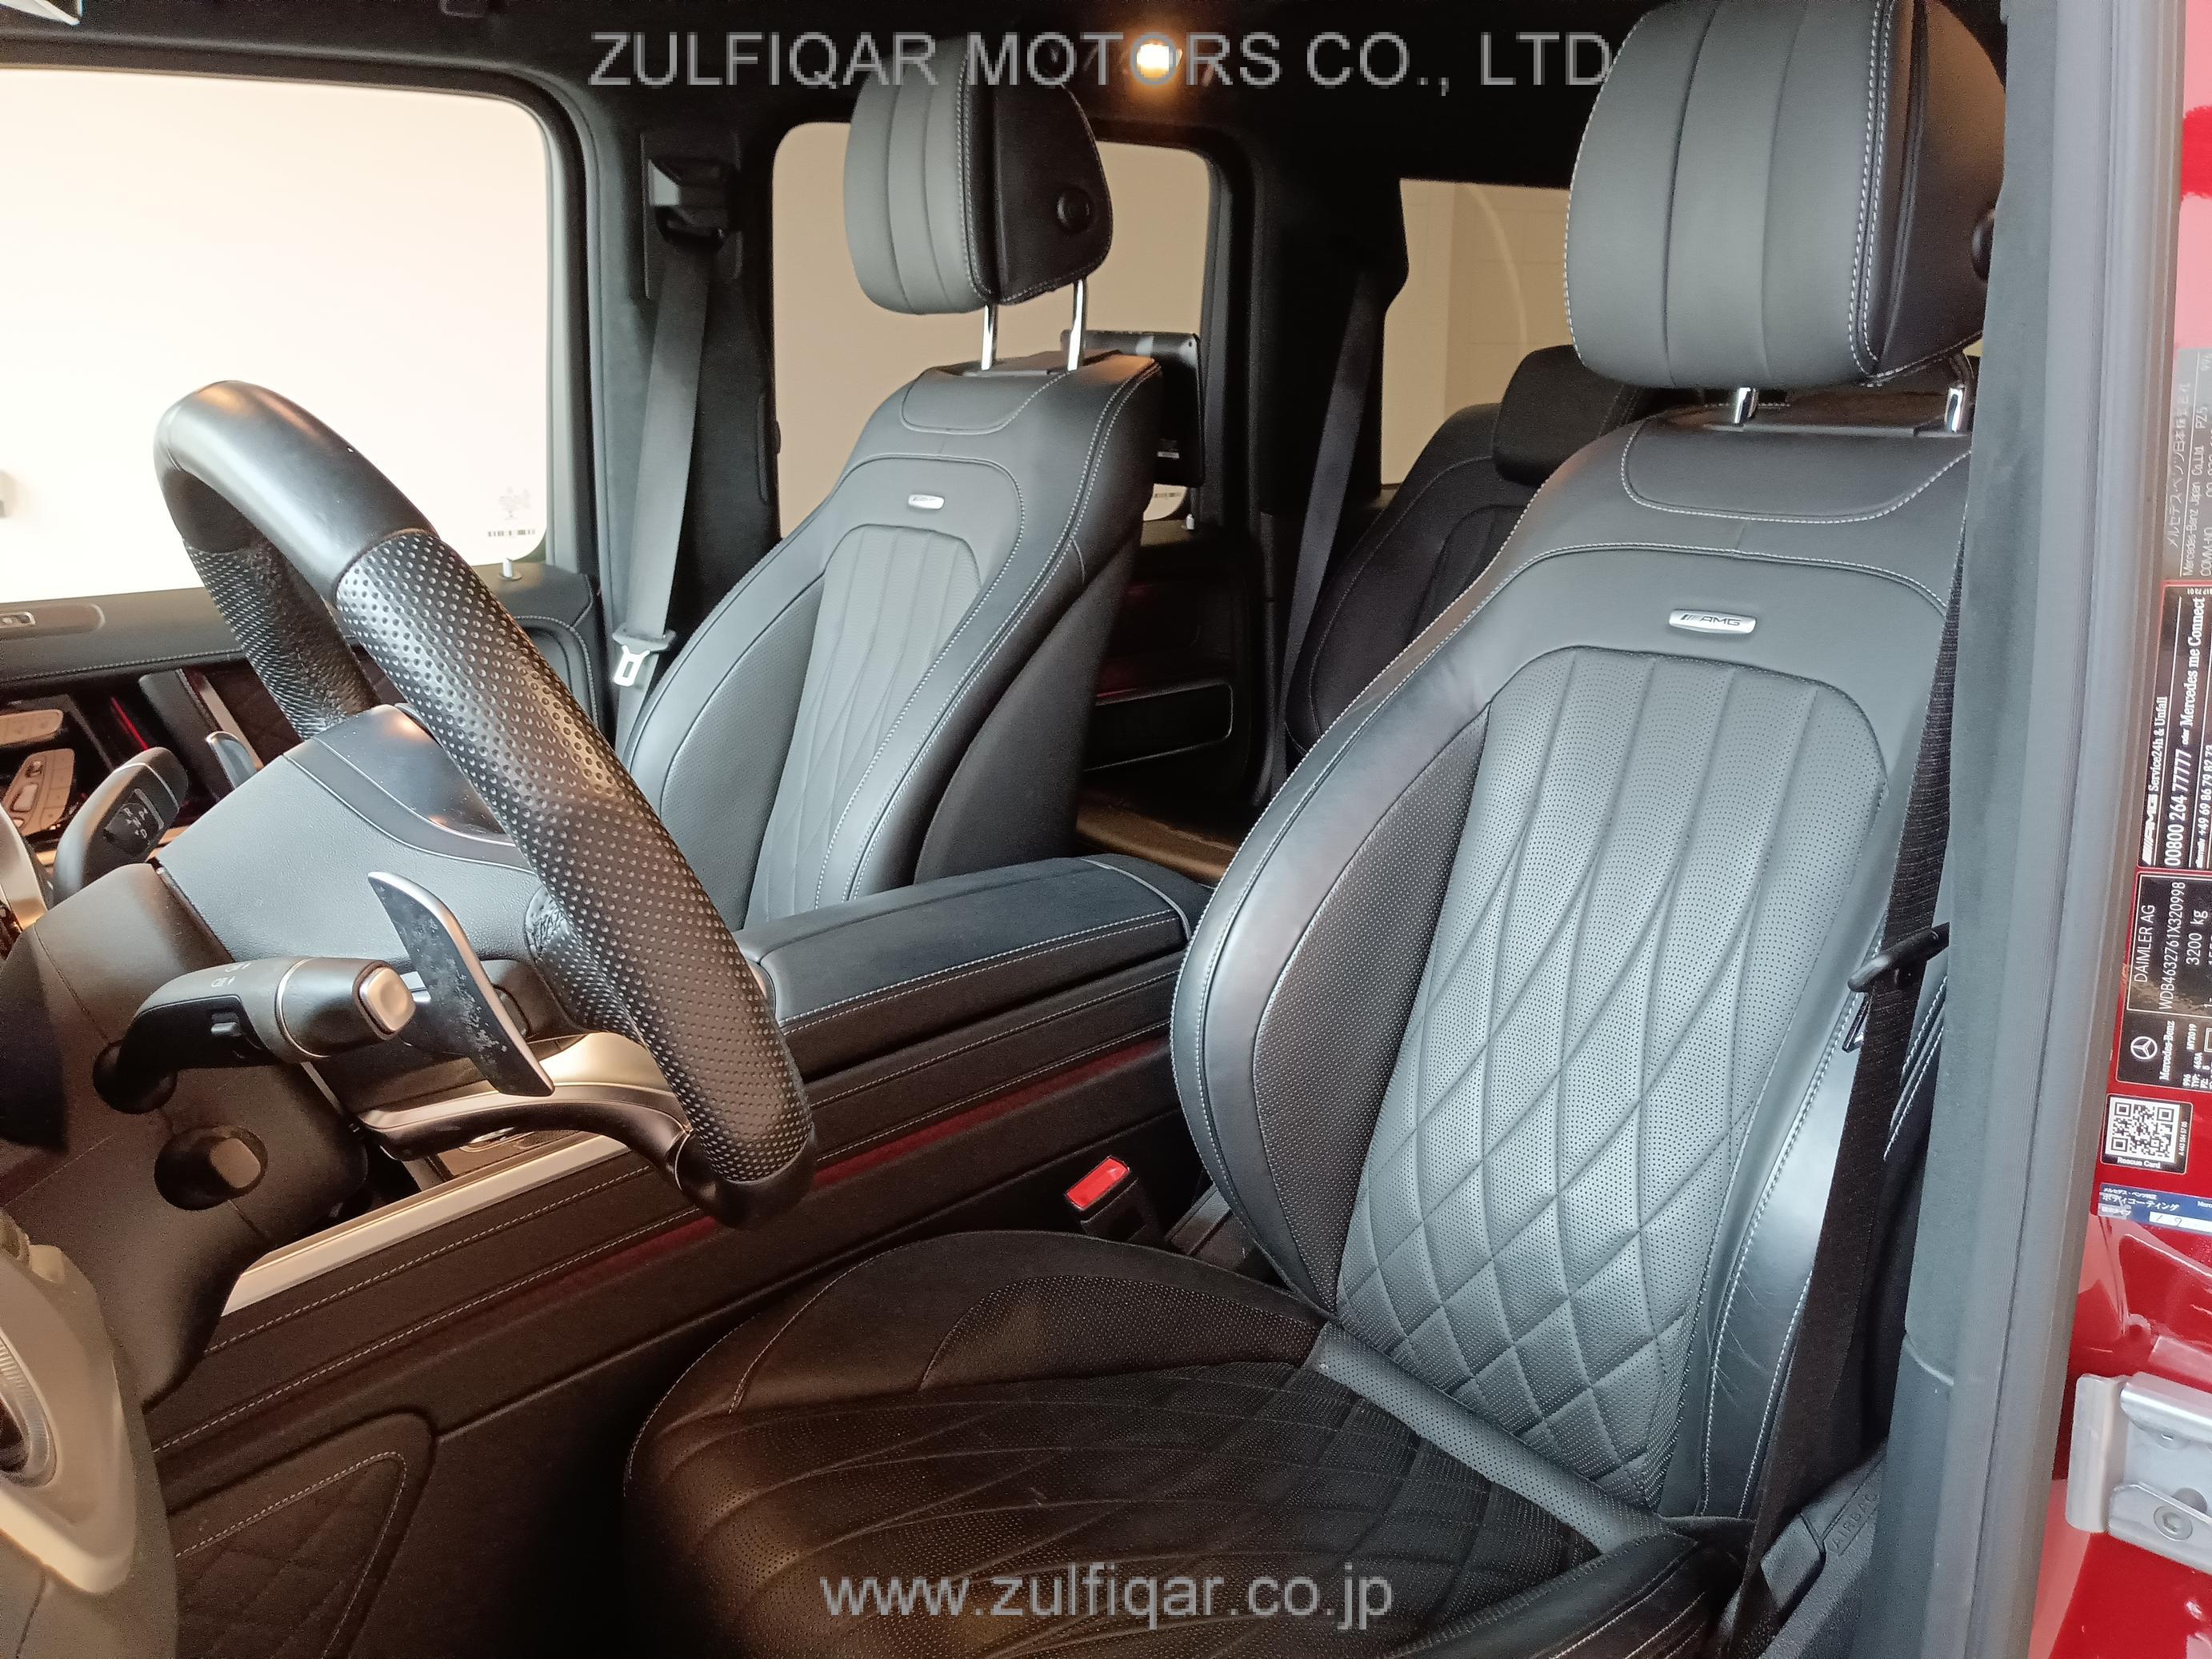 MERCEDES AMG G CLASS 2019 Image 51